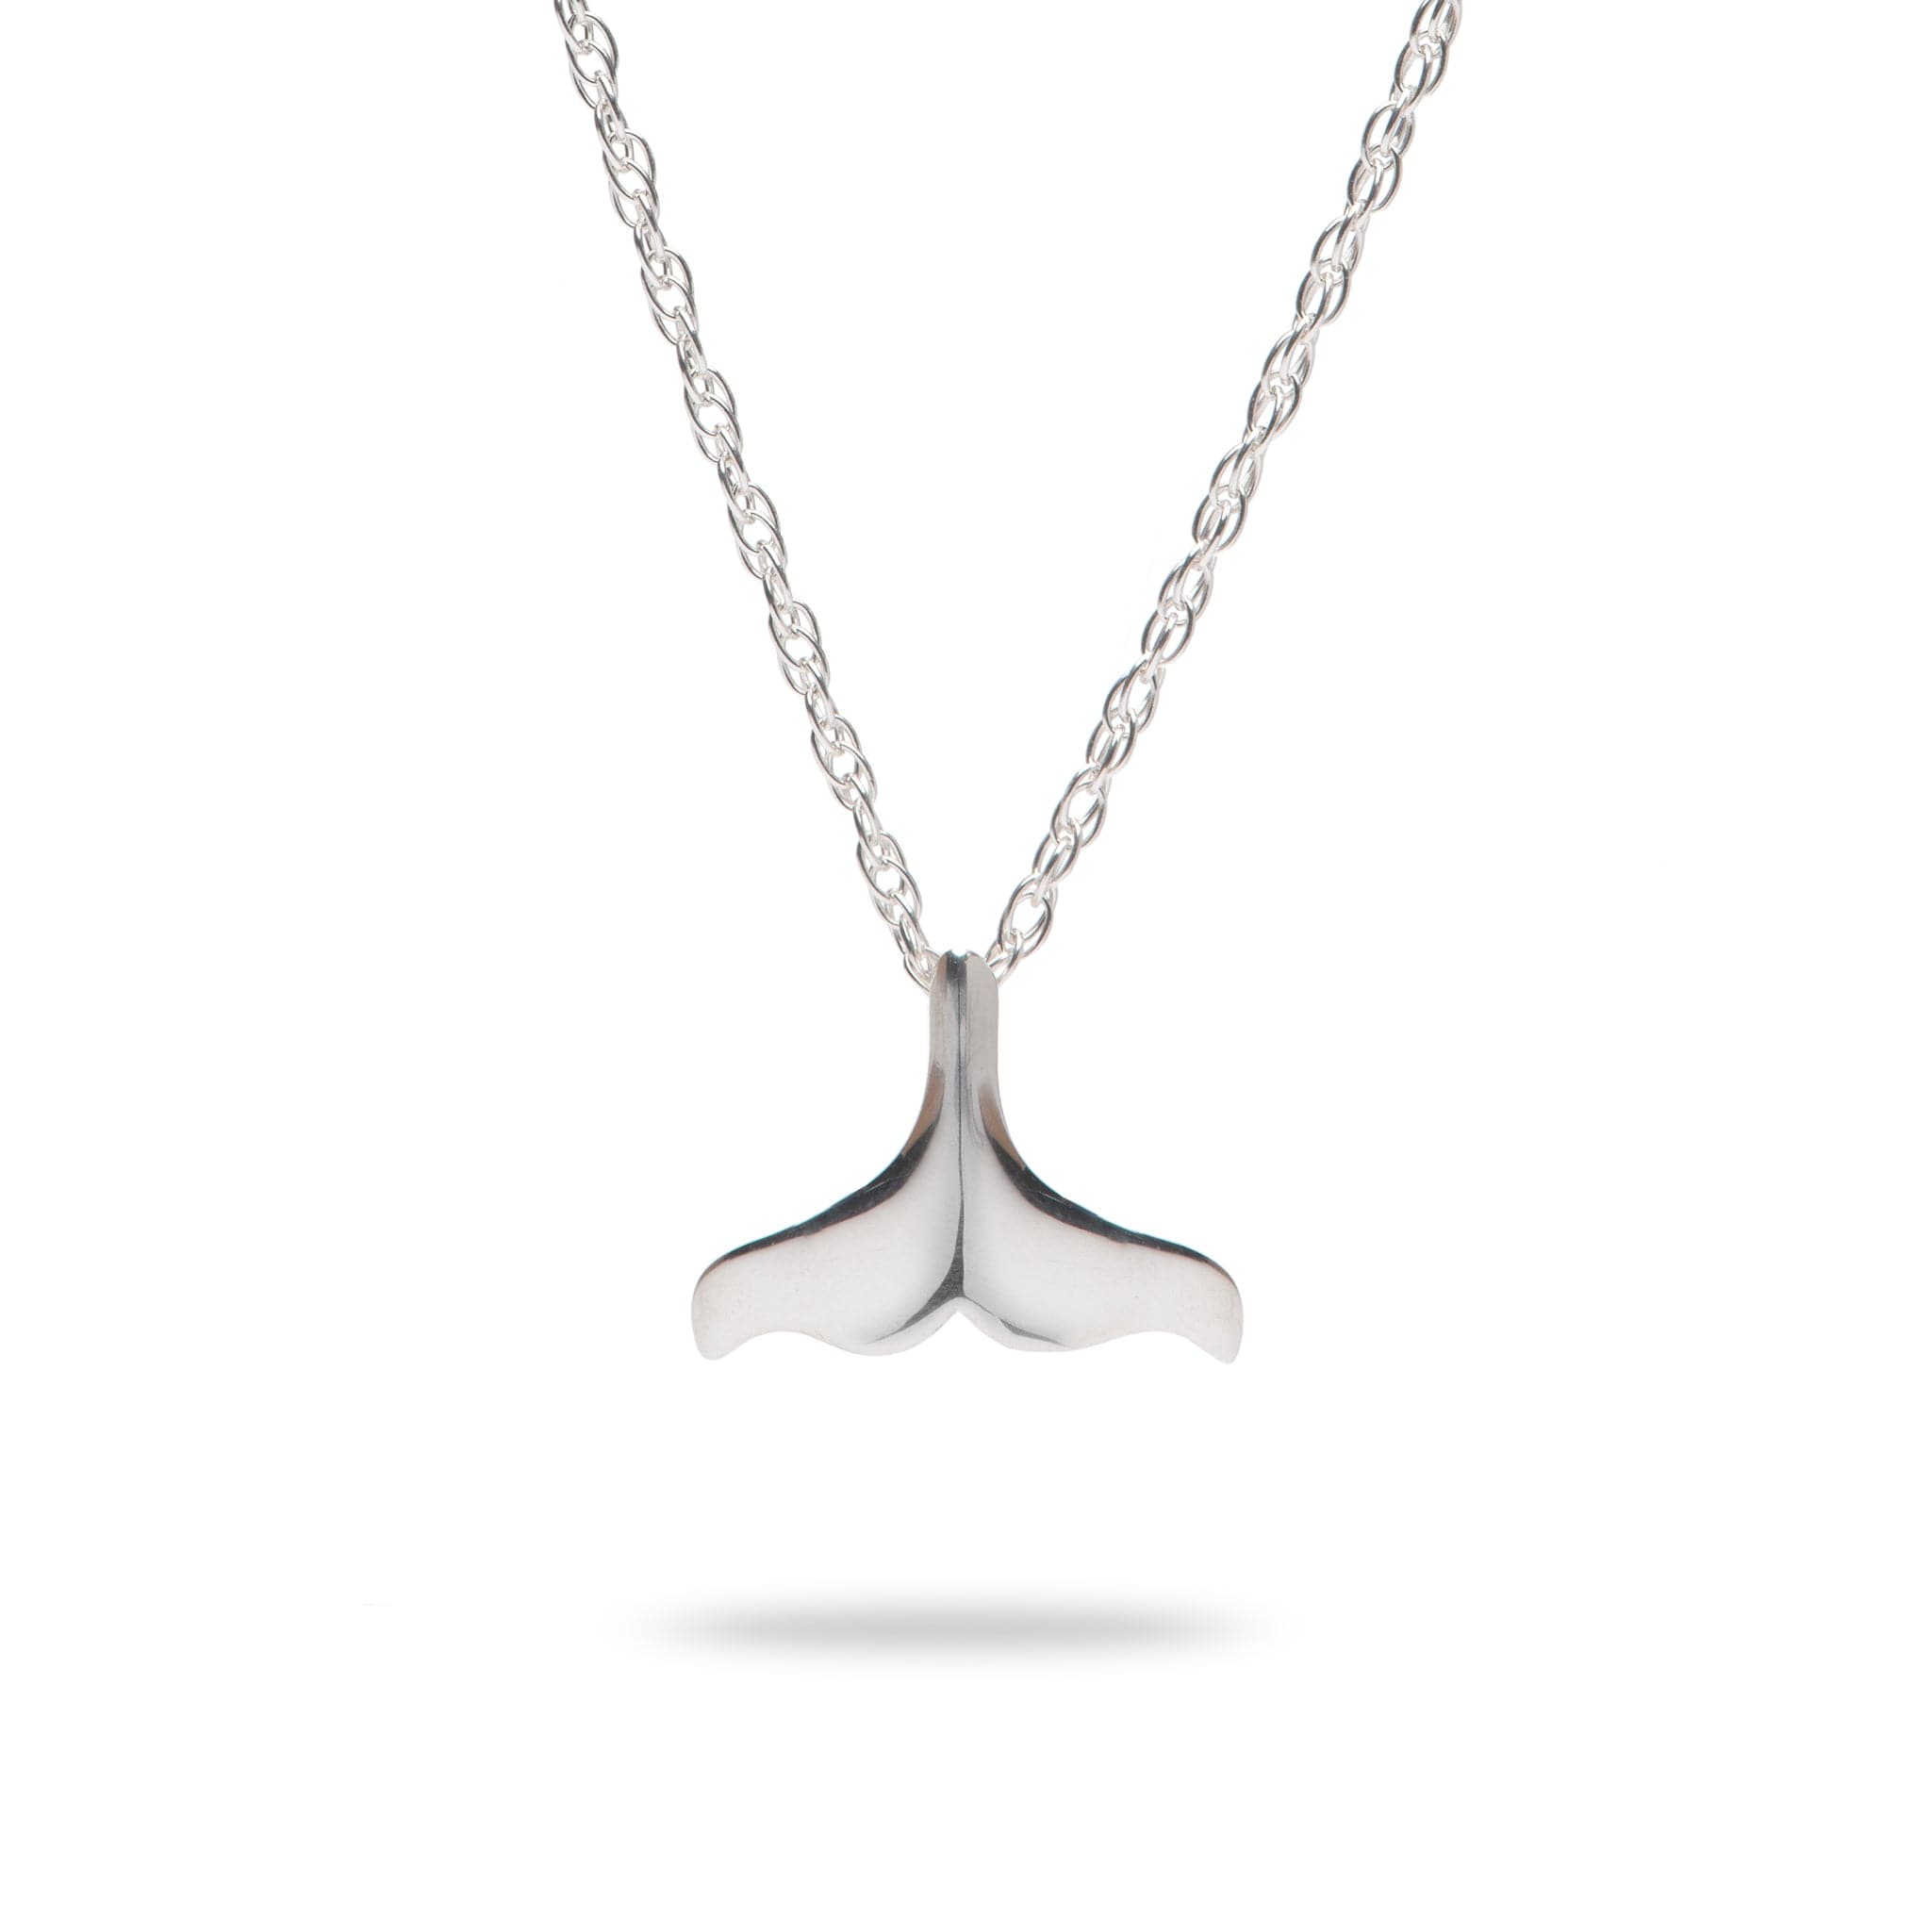 Whale Tail Pendant / Necklace in Sterling Silver